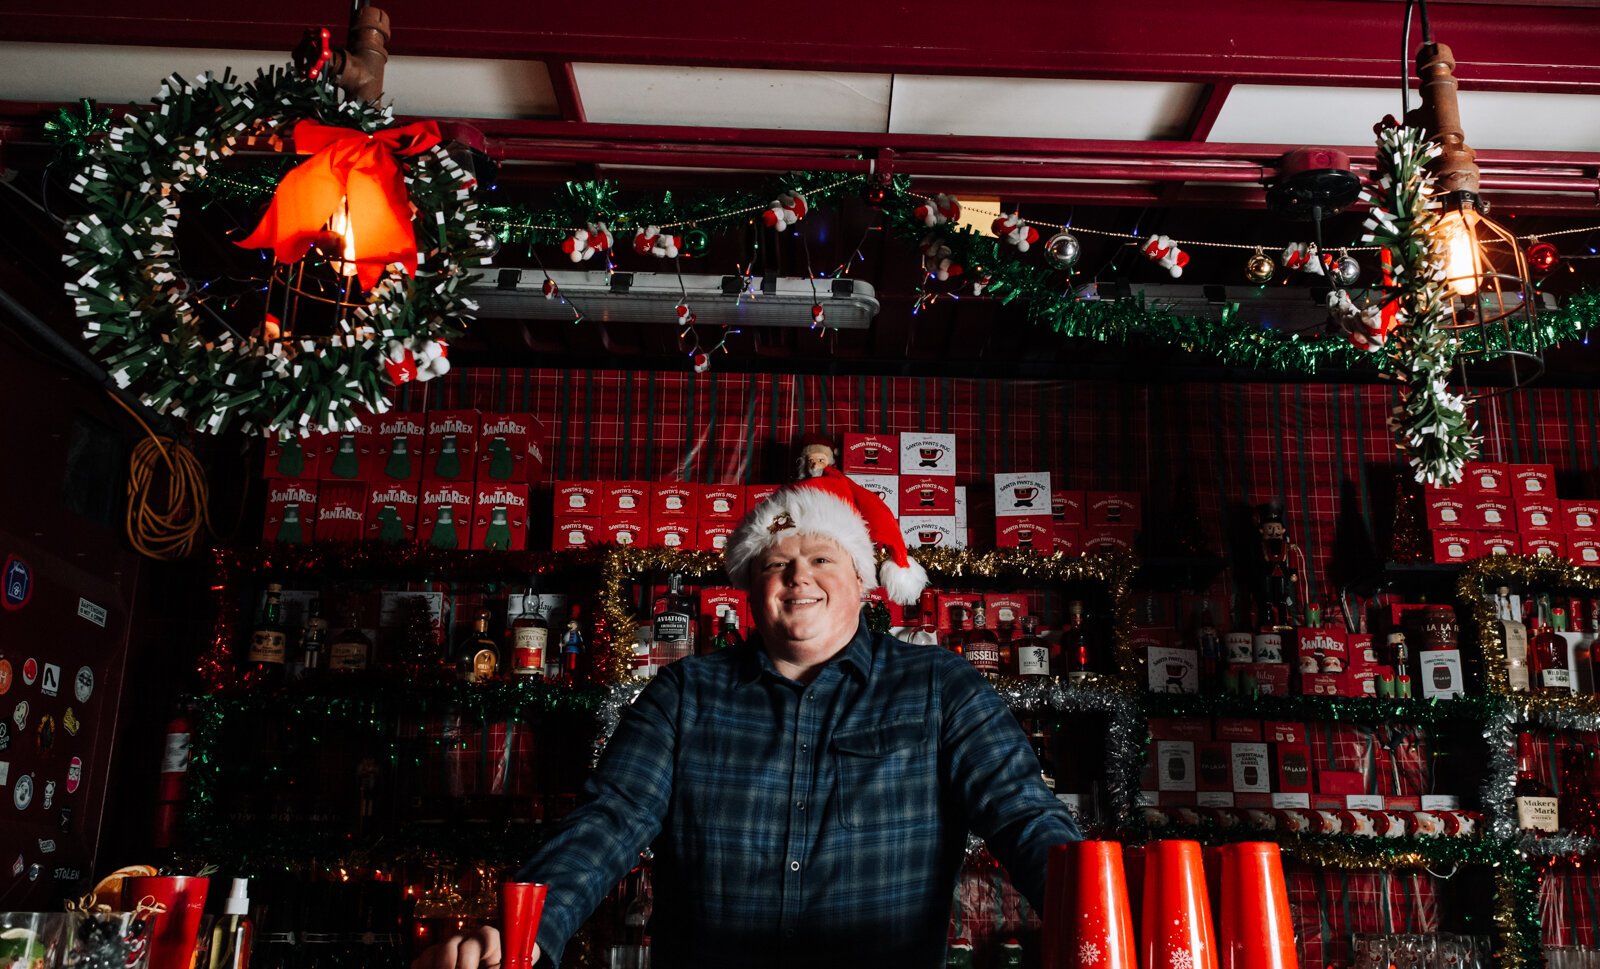 Trevor Scovel is Manager (and Santa) of the Christmas-themed pop-up bar, Miracle on Jefferson, in the heated tent at 301 W. Jefferson Blvd. Suite 99.